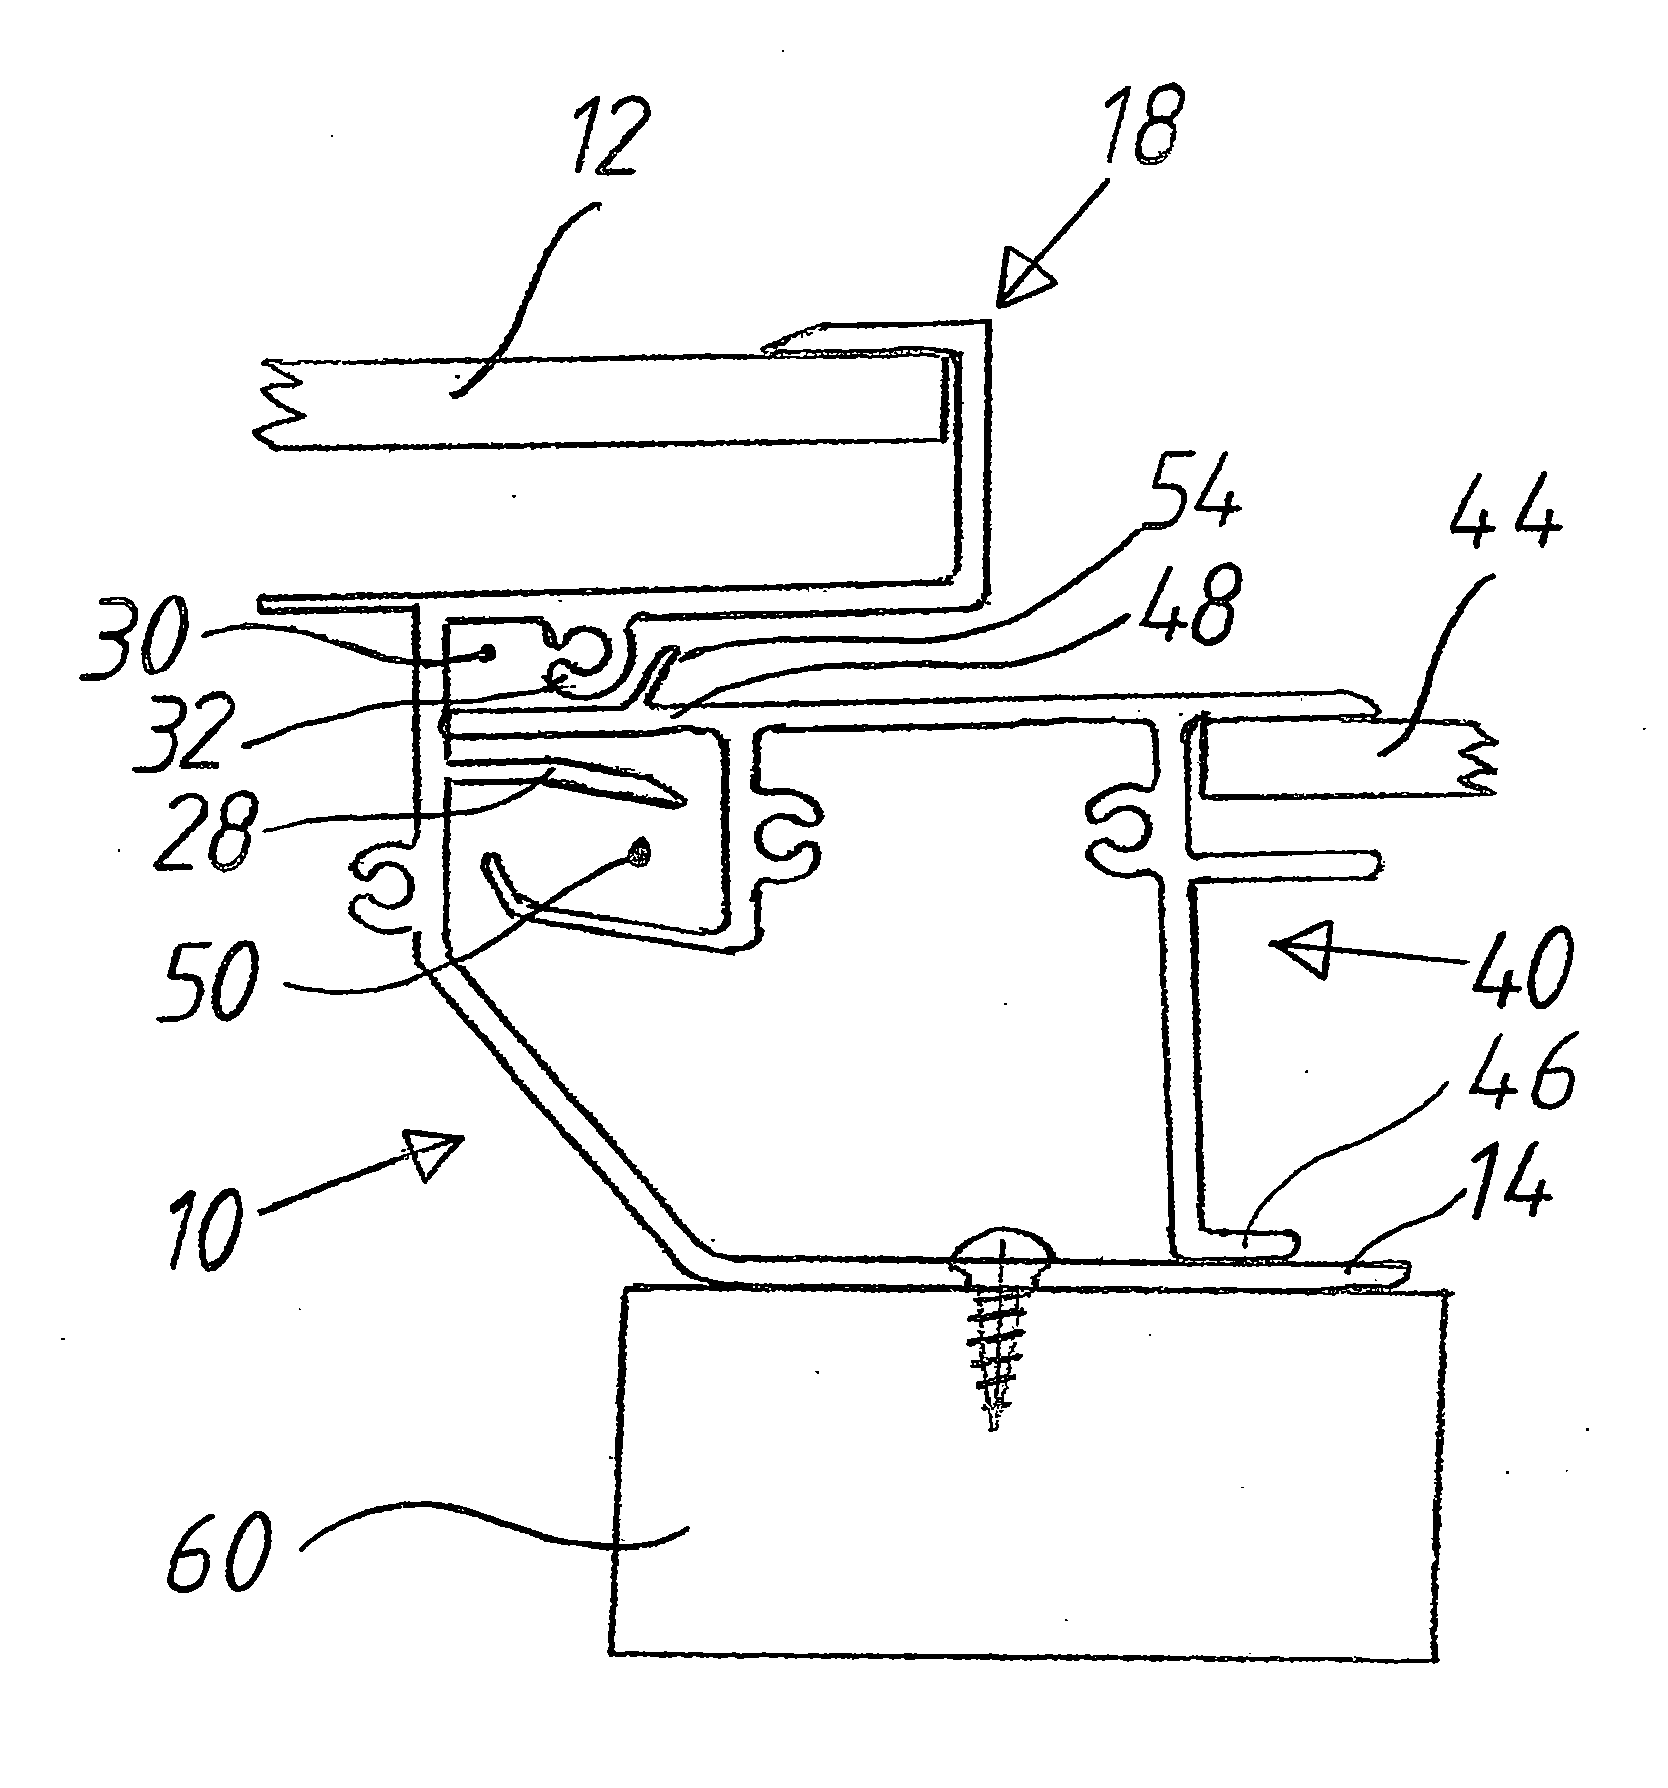 Fastening system for a plate-shaped structural element